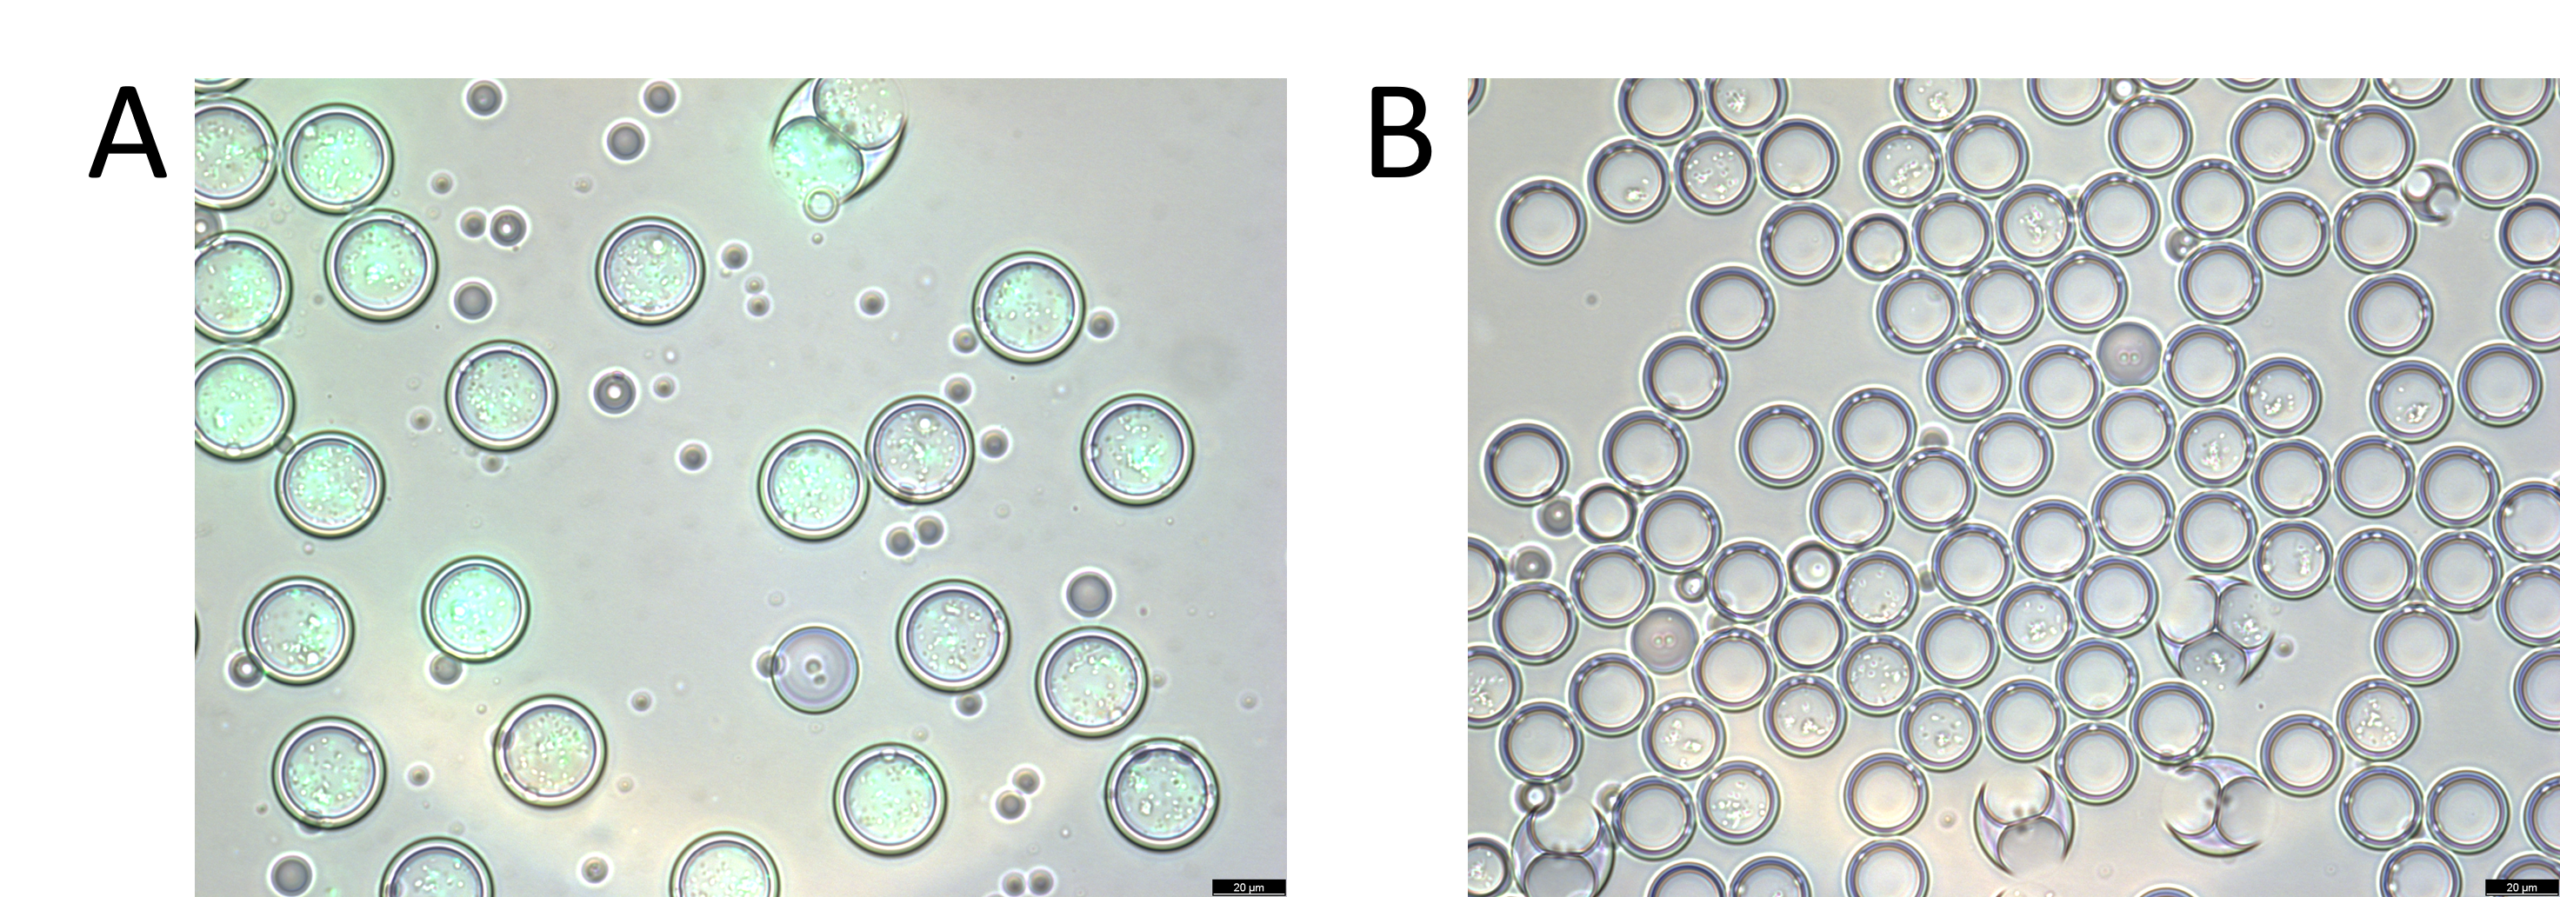 image of fluorescent droplets after droplet sorting and flow cytometry